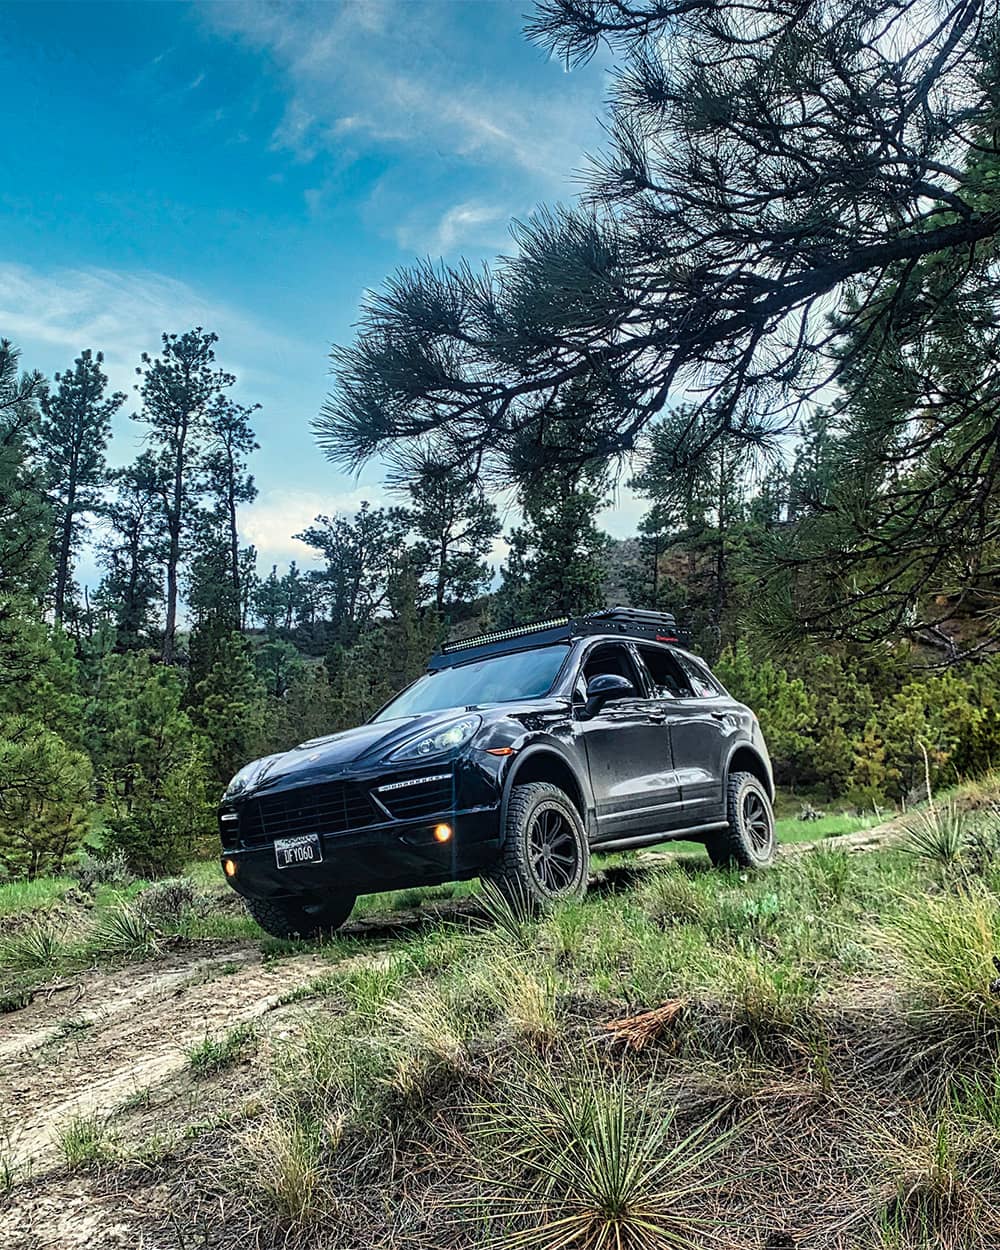 Off-roading in a black lifted Porsche Cayenne 958 turbo